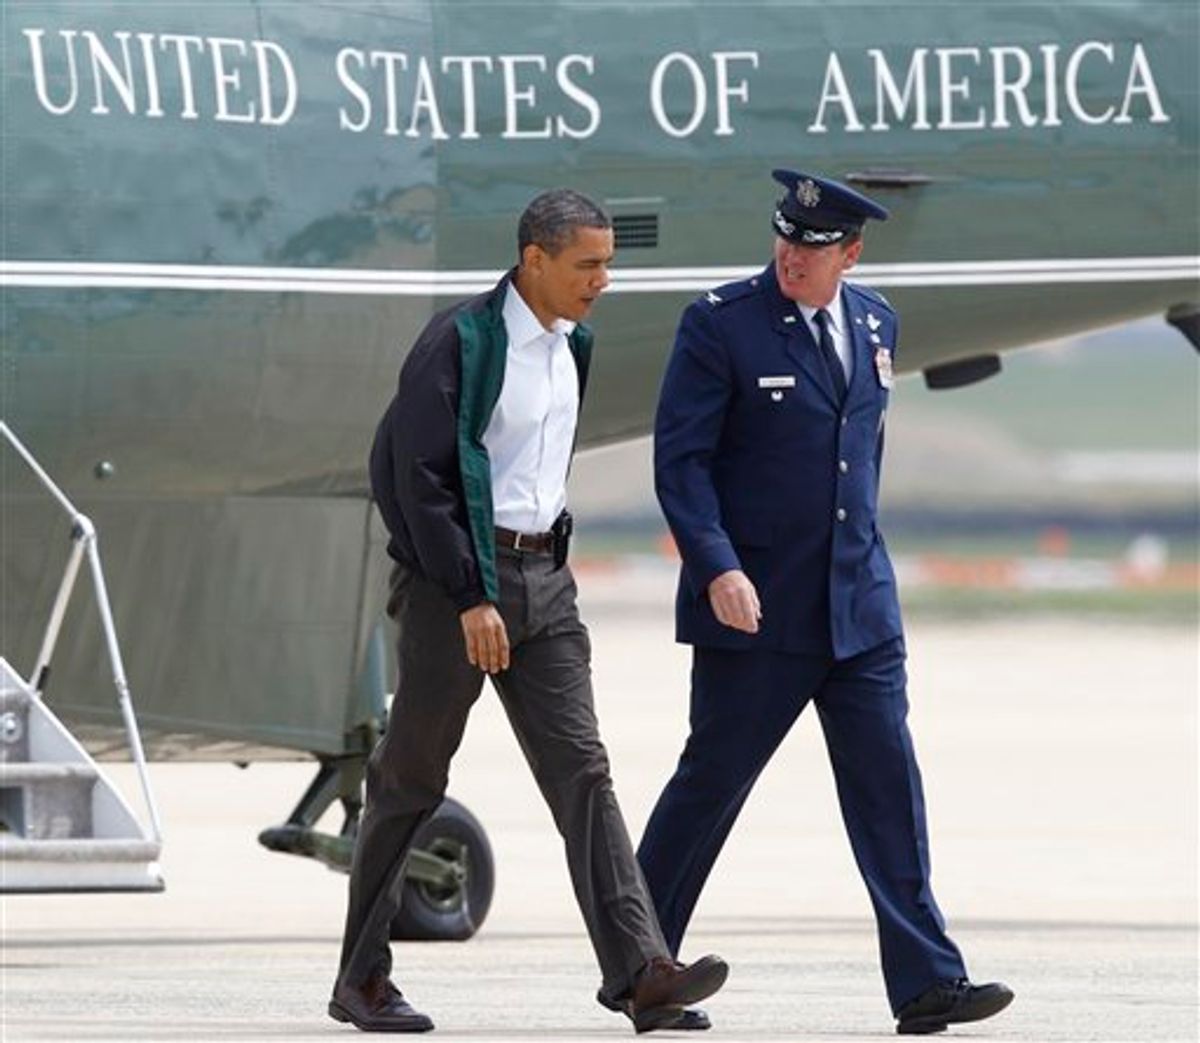 President Barack Obama walks with Col. Lee dePalo, Vice Commander of the 11th Wing, towards Air Force One at Andrews Air Force Base, Md., Sunday, May 29, 2011, on his way to visit tornado victims in Joplin, Mo. (AP Photo/Luis M. Alvarez) (AP)